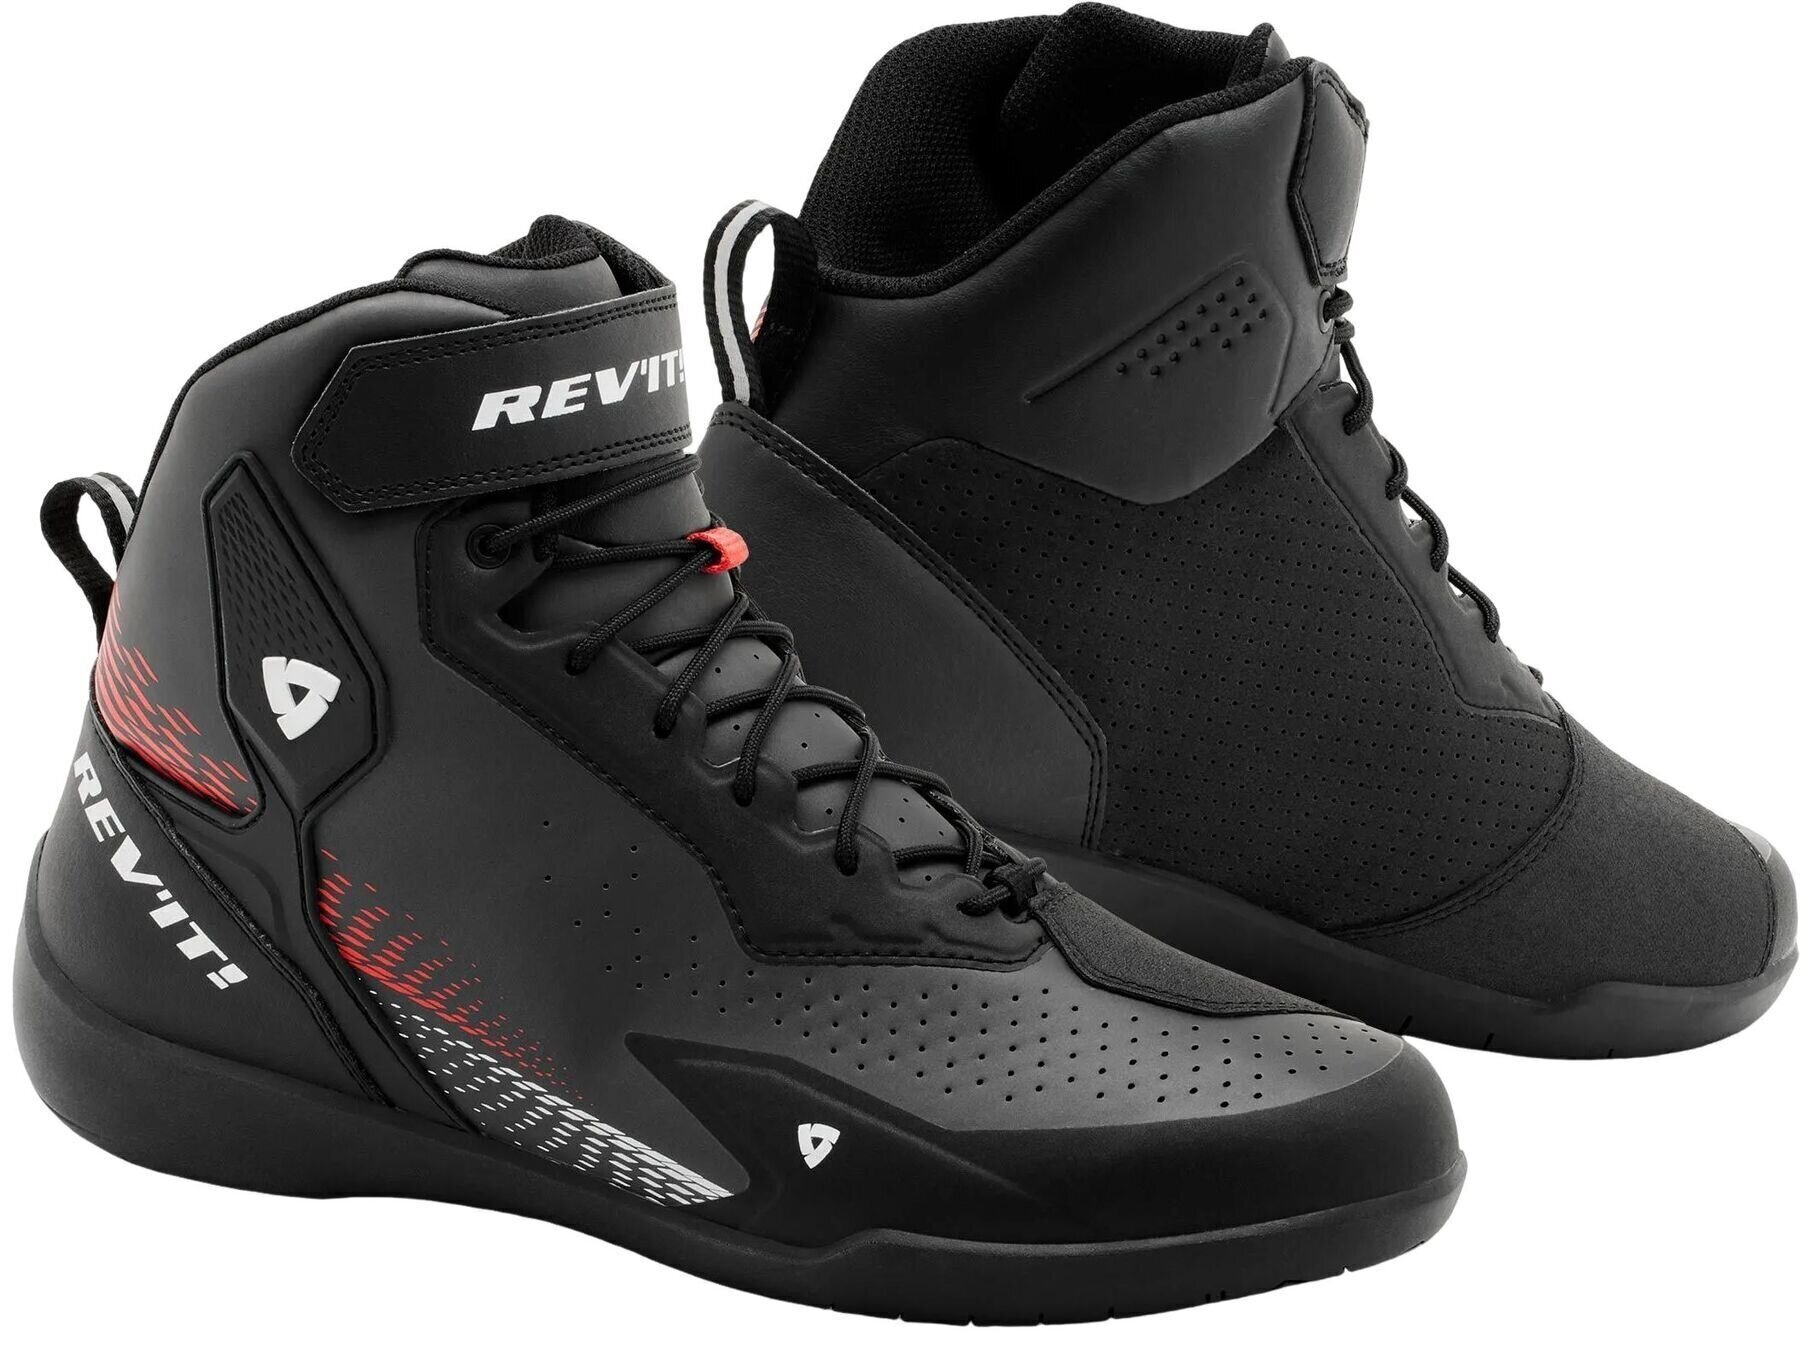 Motorcycle Boots Rev'it! Shoes G-Force 2 Black/Neon Red 39 Motorcycle Boots